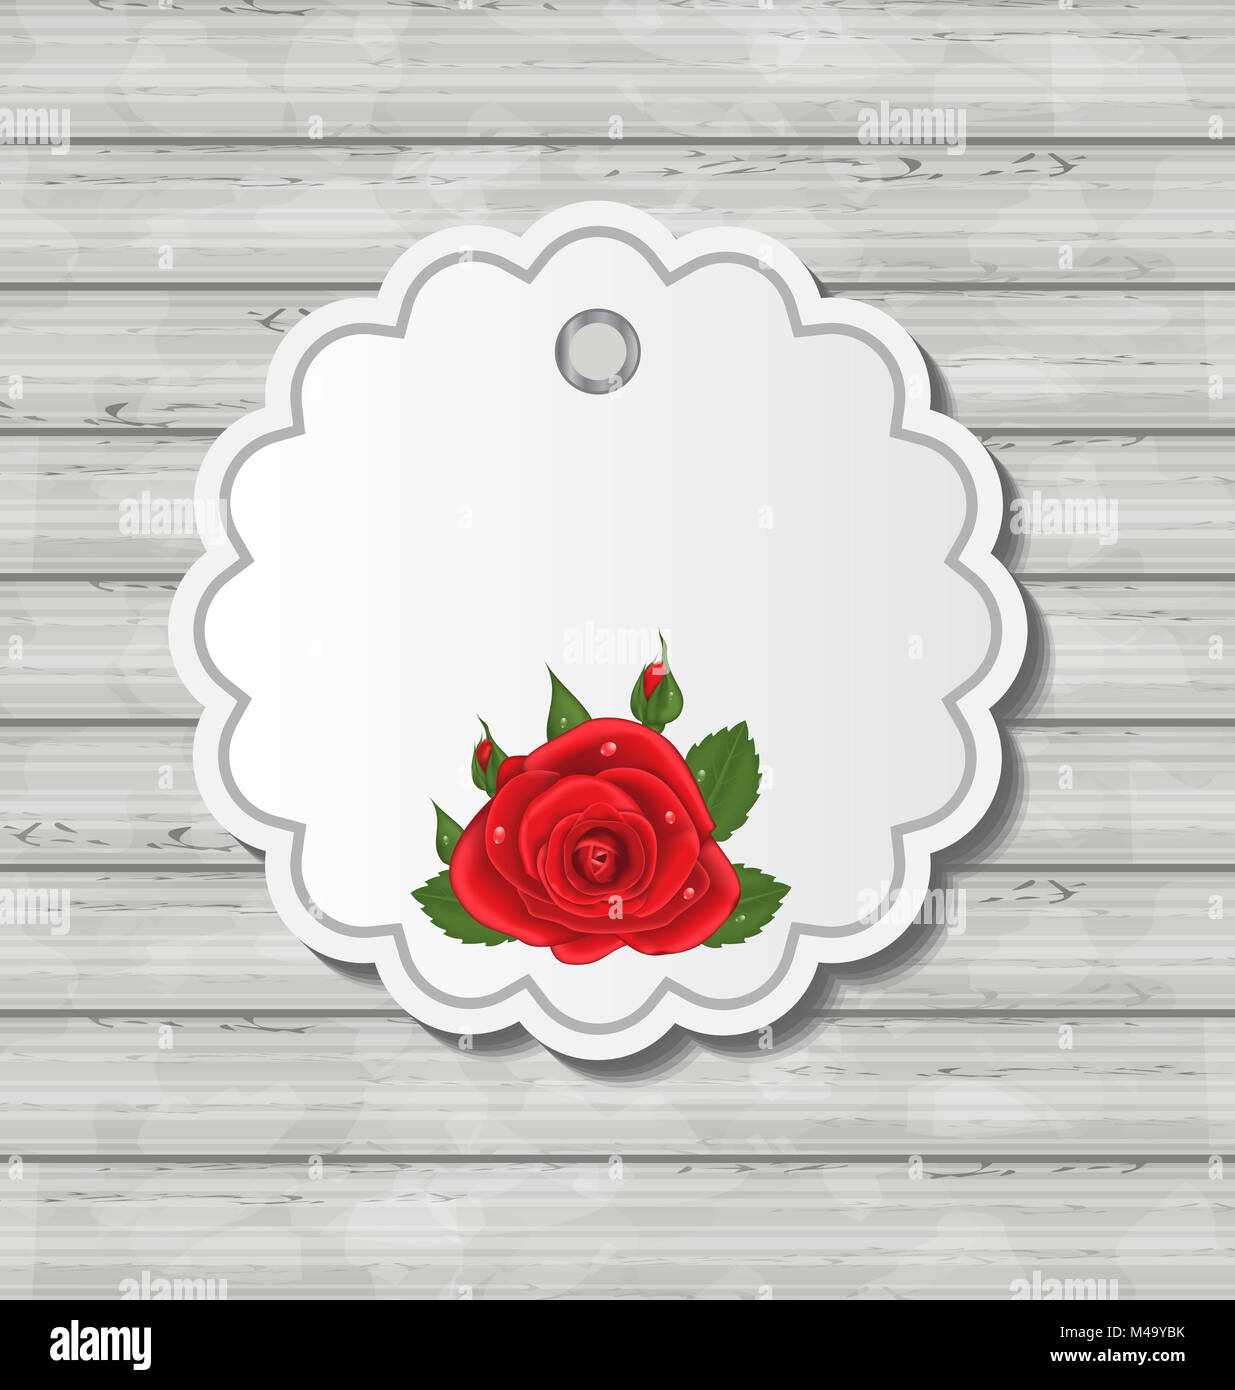 Card with red rose for Valentine Day on wooden texture Stock Photo